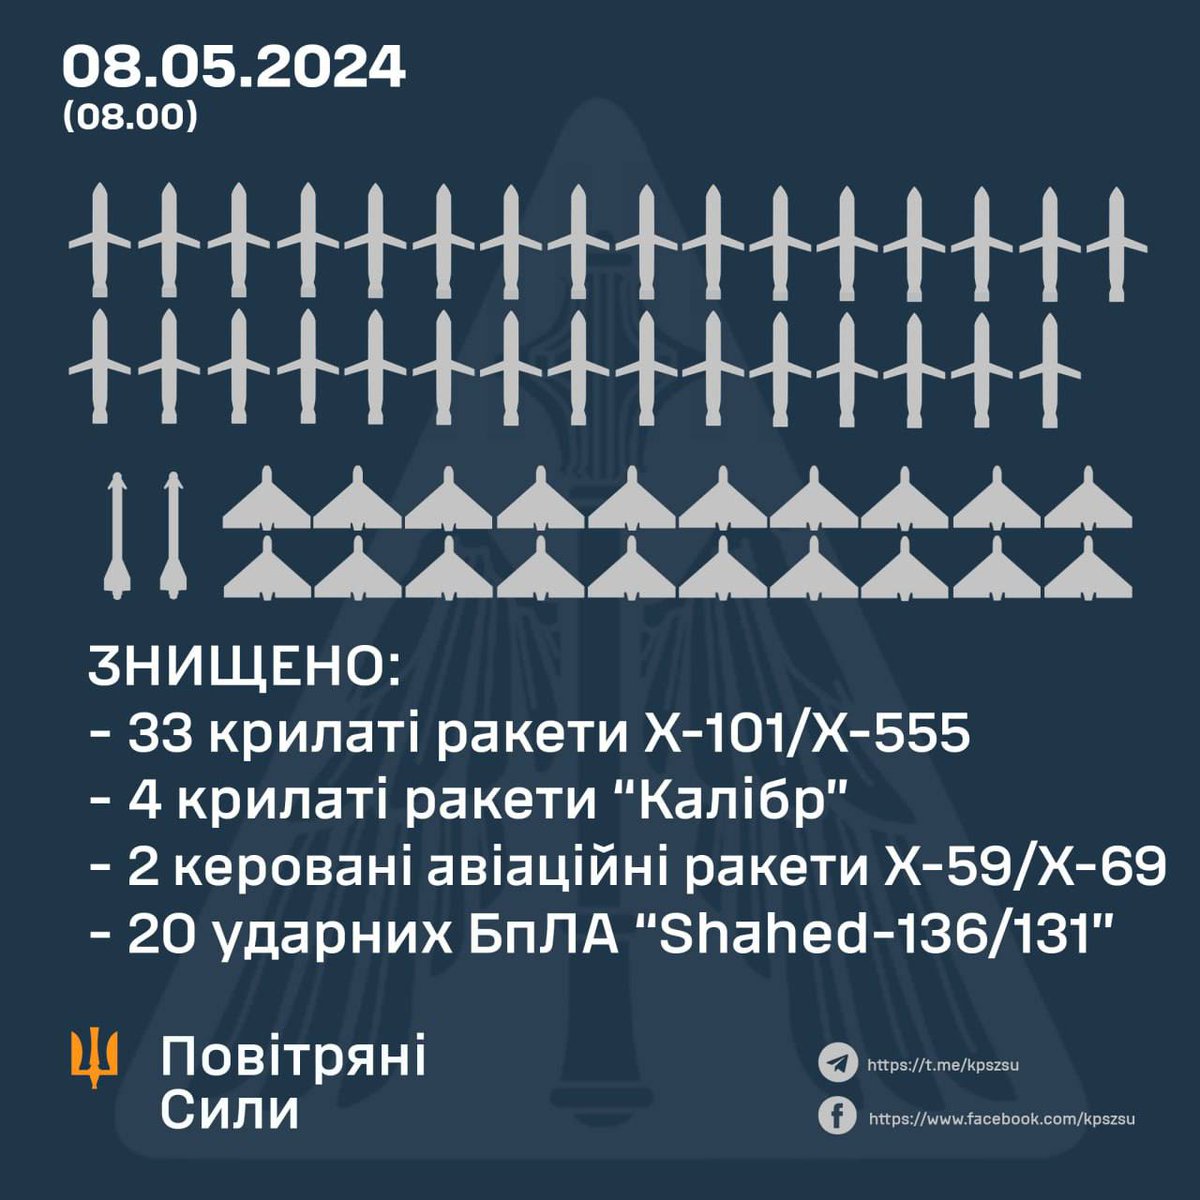 Overnight, in one of the largest missile barrages of the year, Russians poured cruise missiles, missiles, ballistic missiles and Iranian drones onto cities across Ukraine.

Around 70% was shot down.